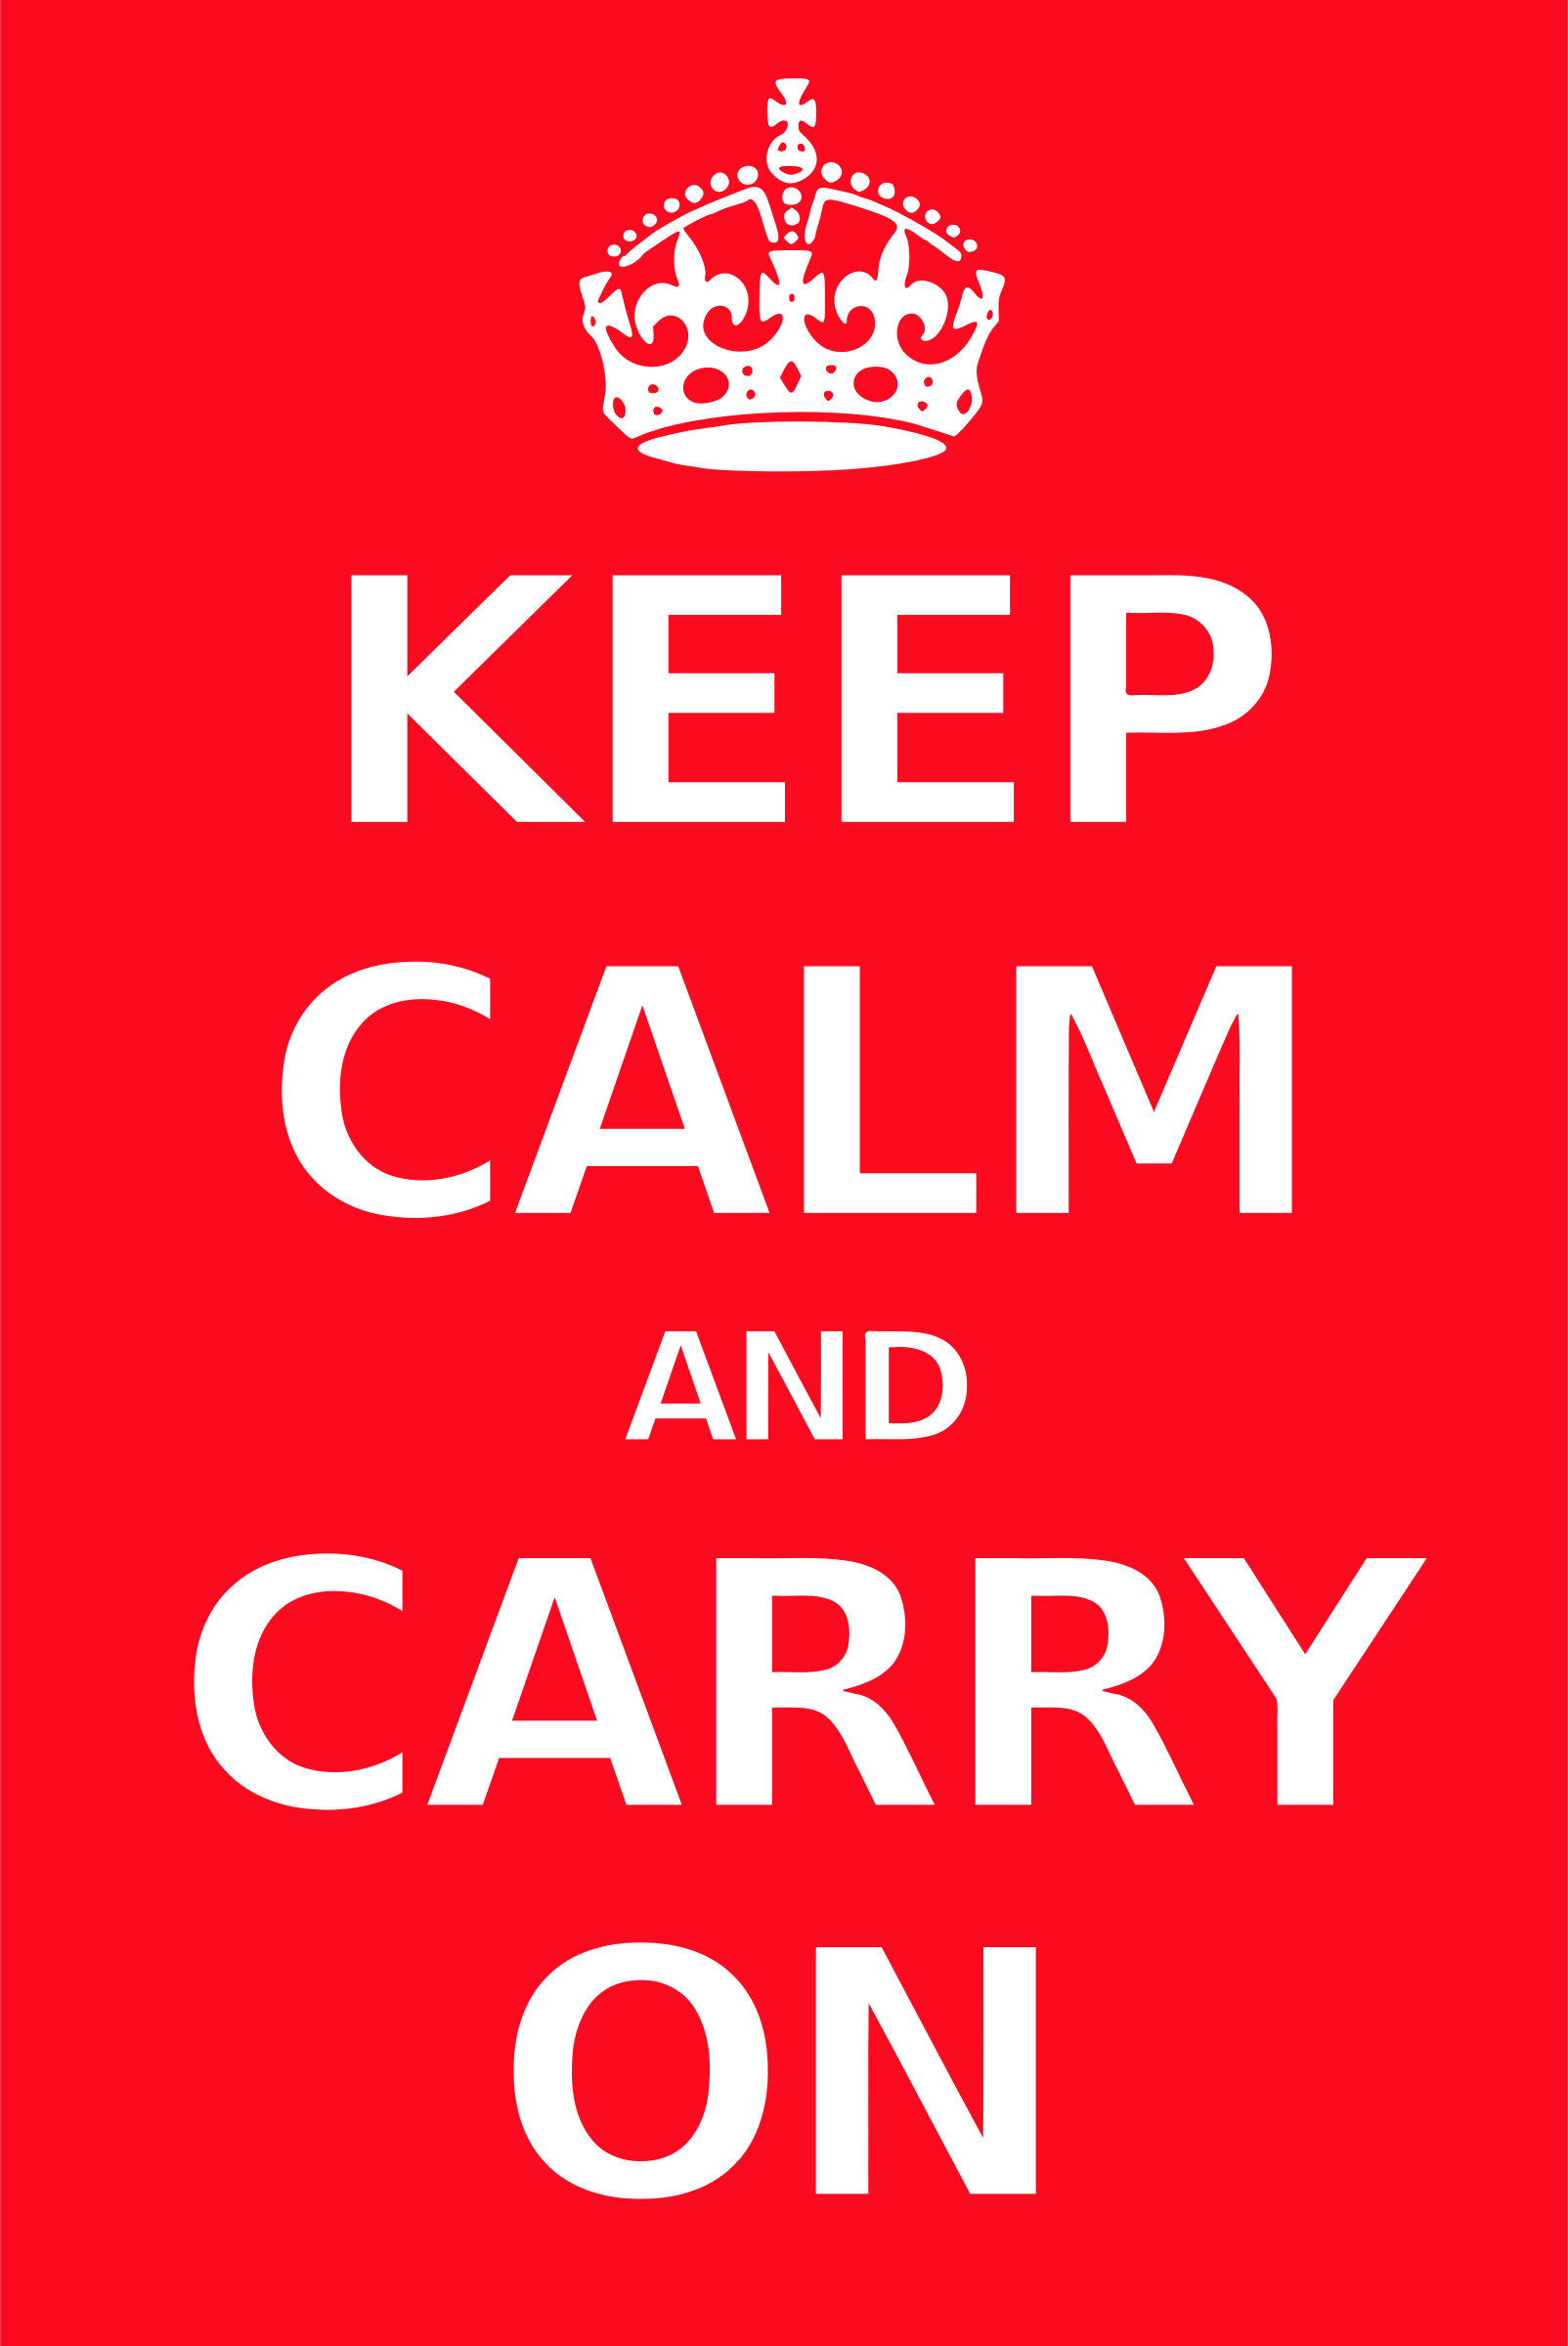 keep calm and carry on clipart - photo #19